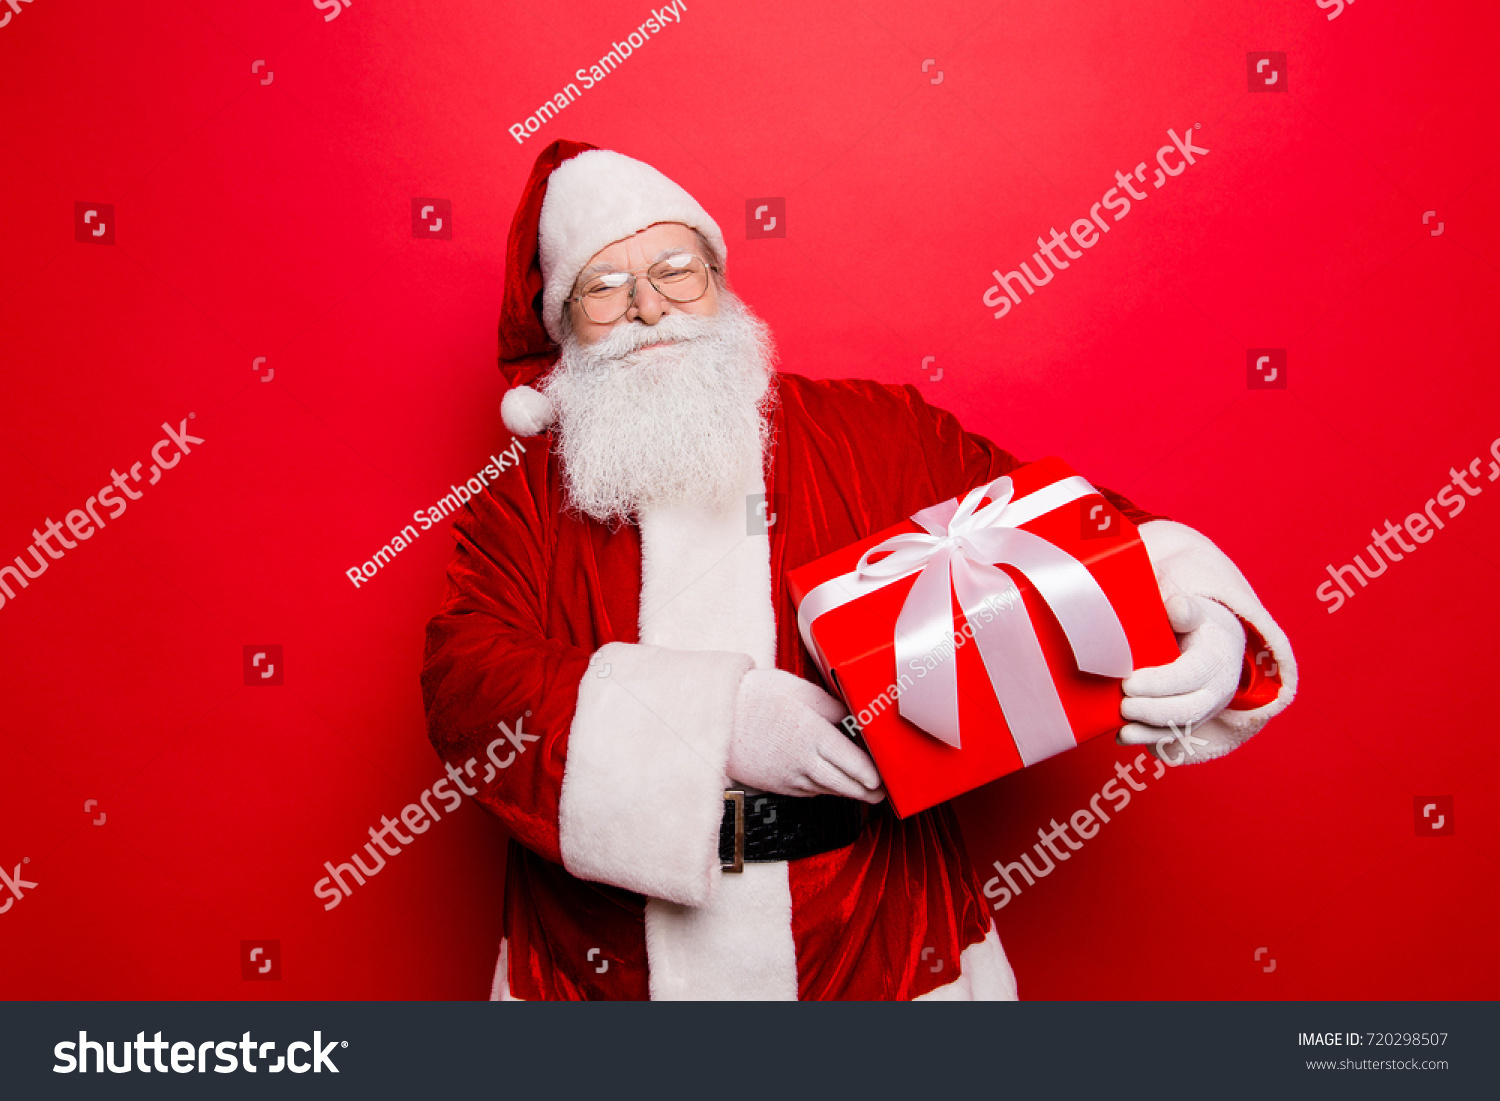 Happiness, noel, festive seosonal occasion. Funny Saint Nicholas in red traditional fur coat and head wear with a wrapped gift with bow, isolated on red background, wishing holly jolly x mas #720298507